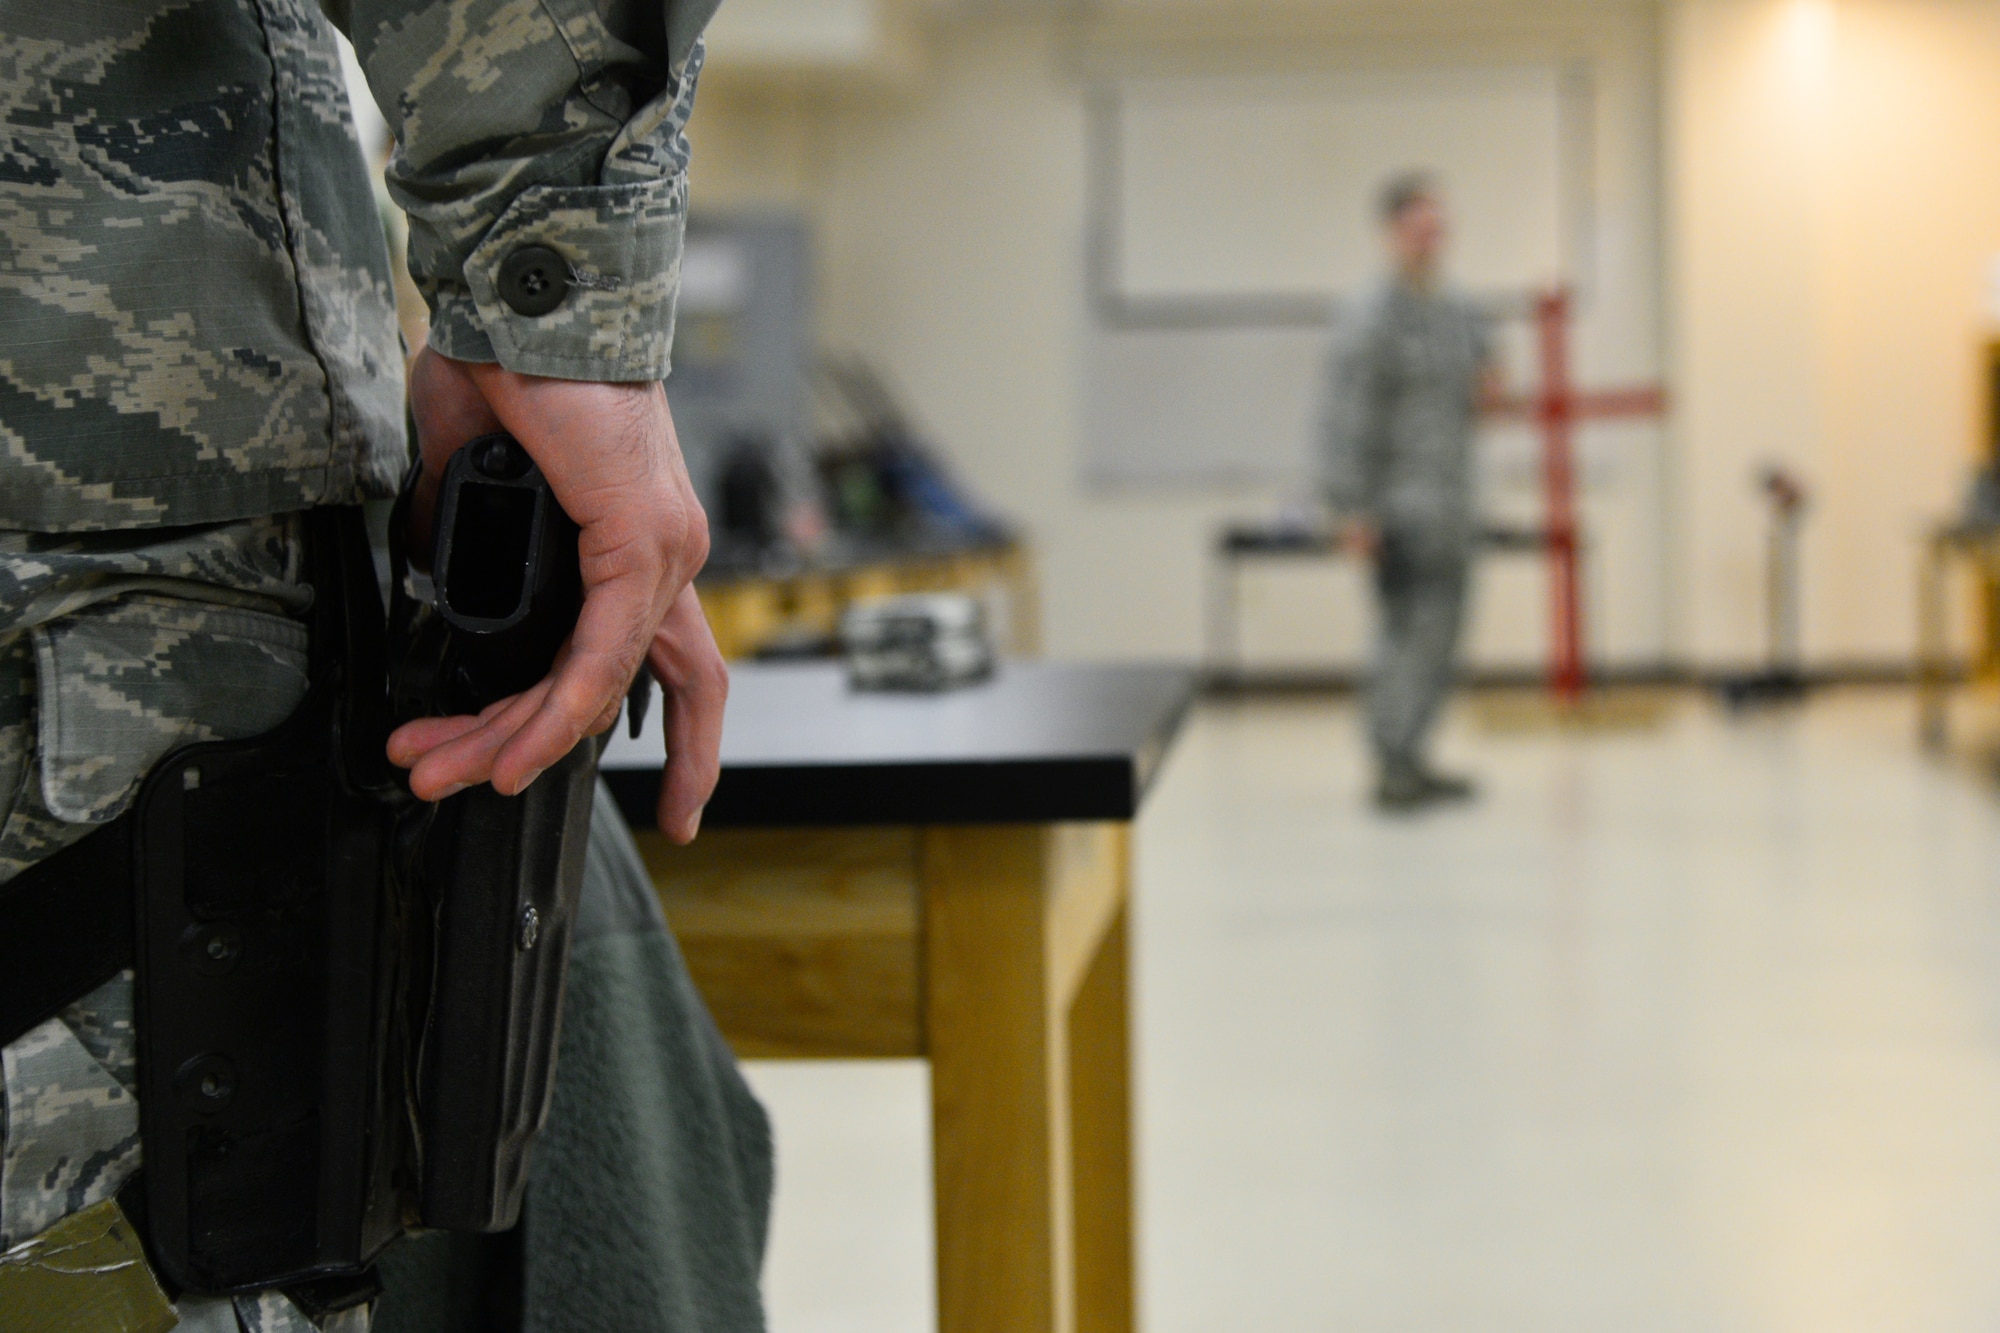 Staff Sgt. Eliezer Ribeiro, 436thLogistics Readiness Squadron quality assurance evaluator, practices drawing his M9 pistol during a weapons fundamentals training course while training to become a unit marshal Jan. 6, 2016, at the Combat Arms Training and Maintenance facility on Dover Air Force Base, Del. unit marshals will have the option to carry from a drop down leg holster or hip holster. (U.S. Air Force photo/Senior Airman William Johnson)